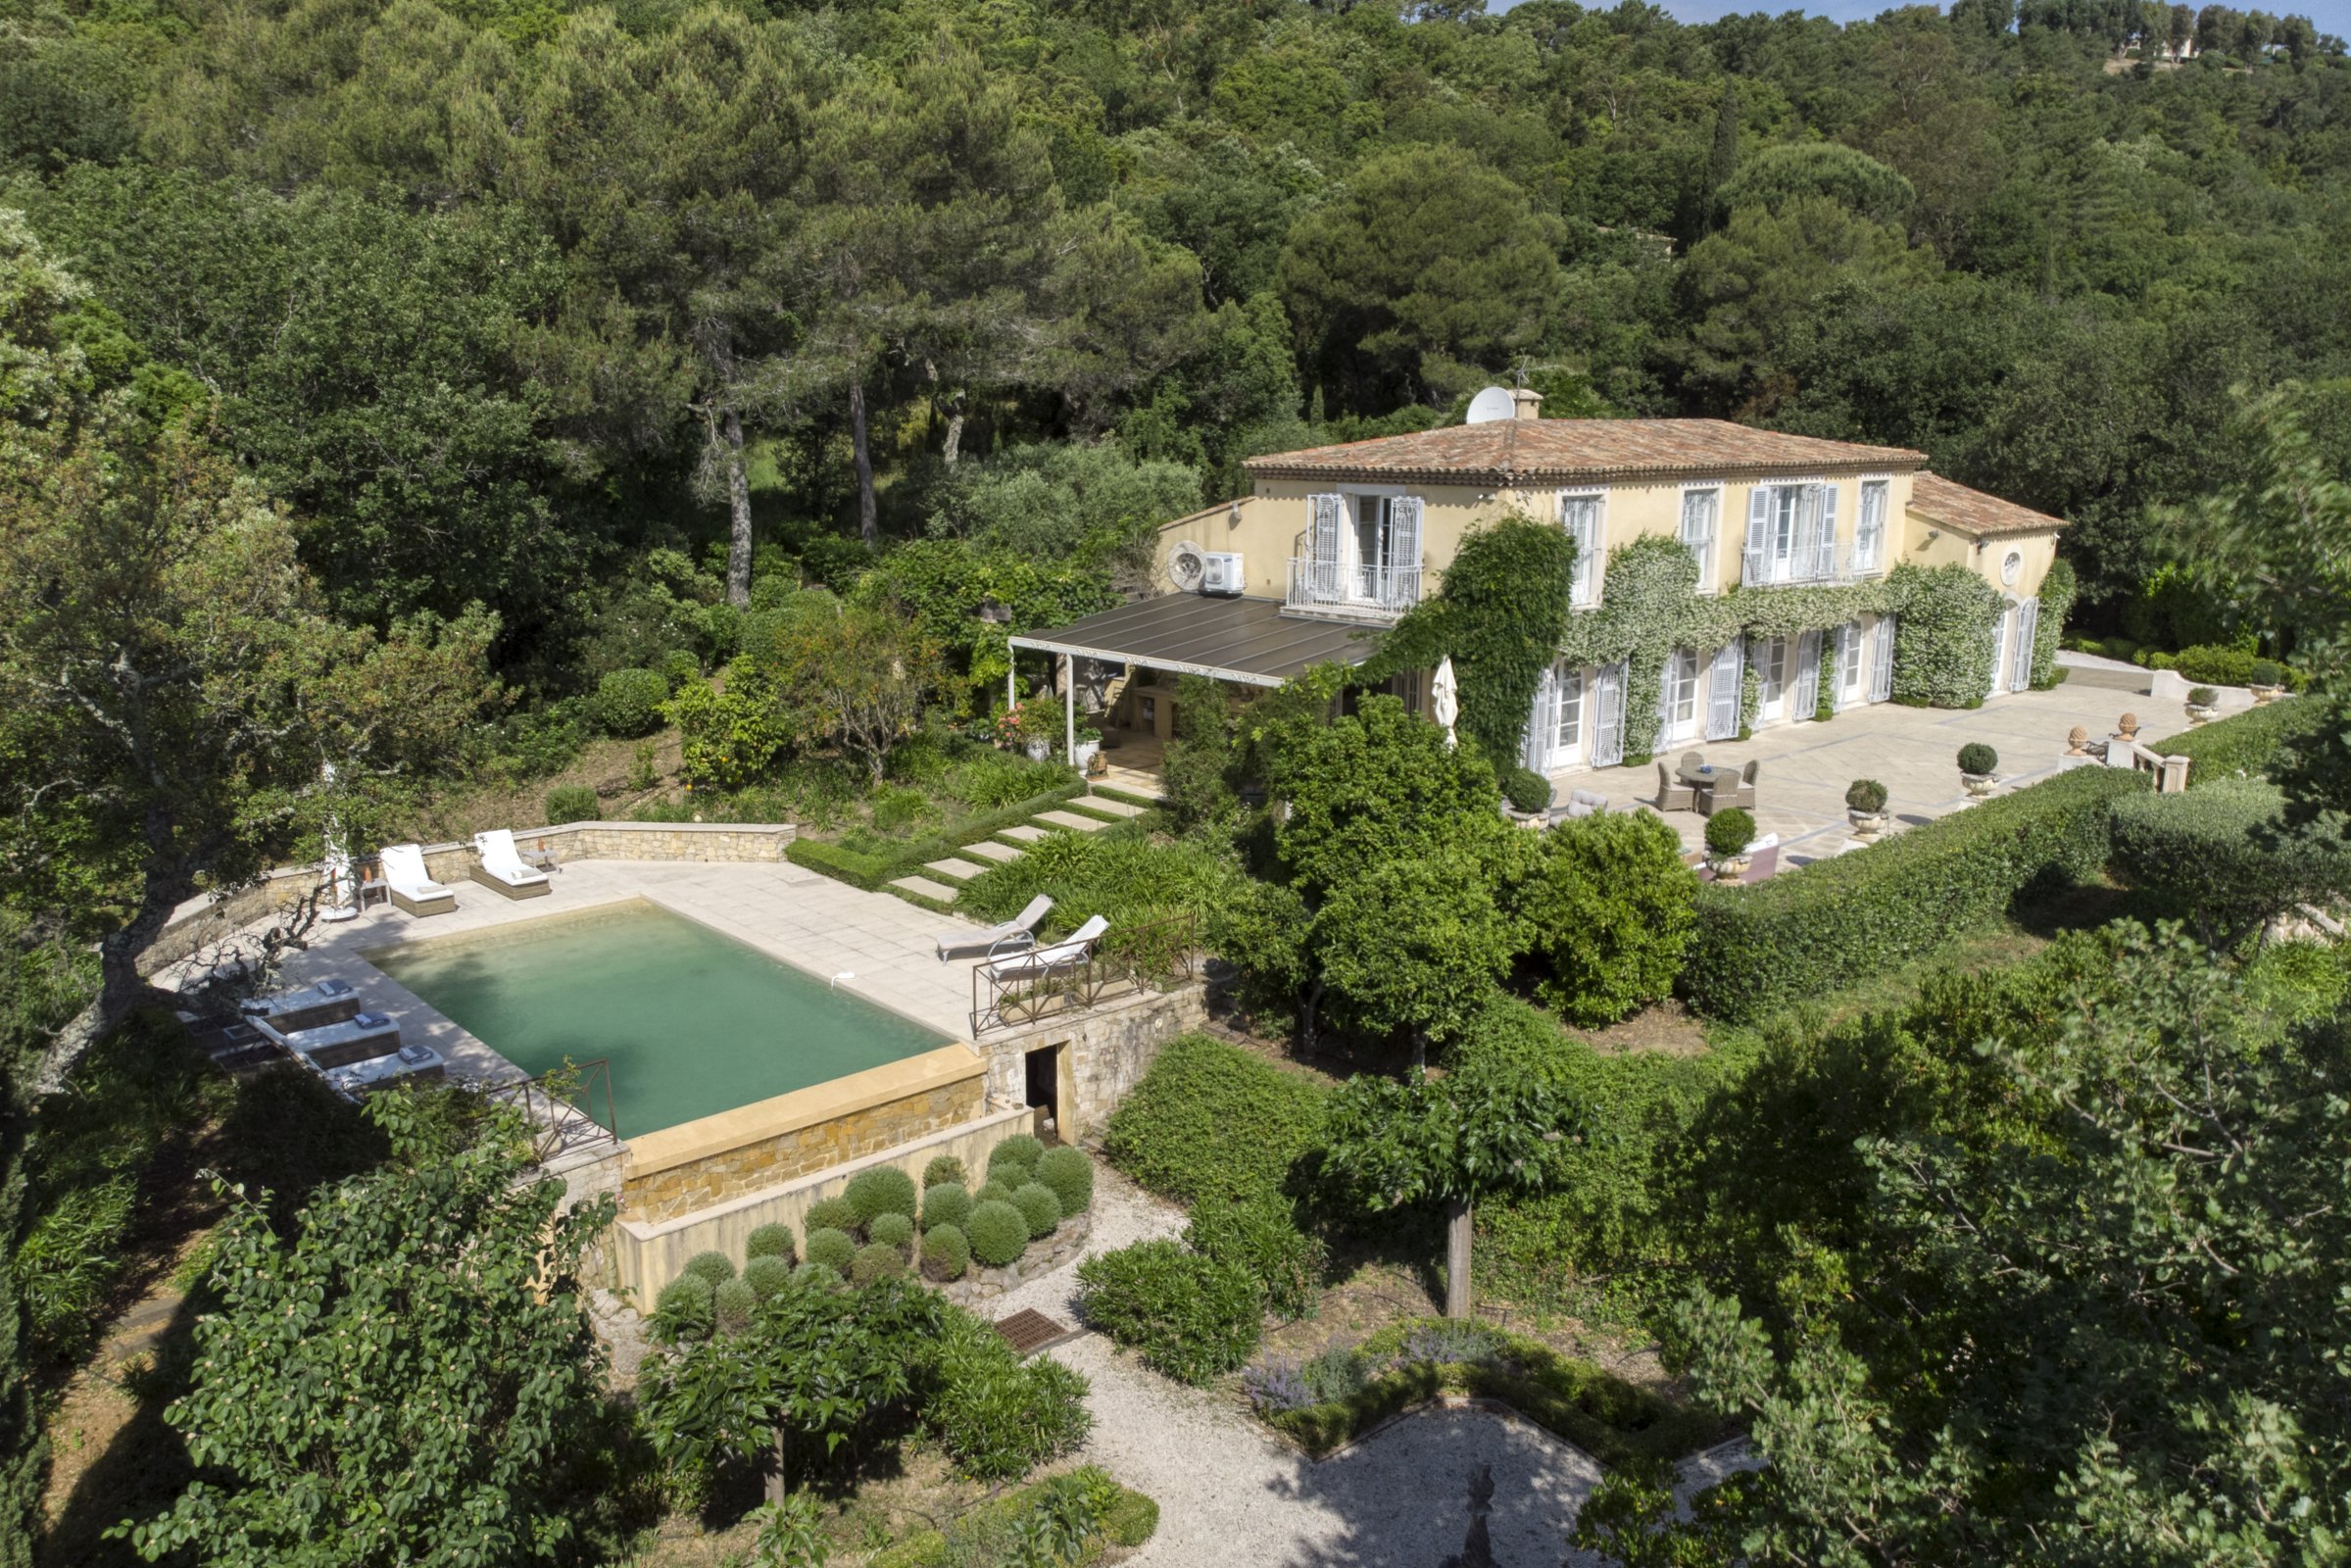 Francis York Provencal Villa in the Hills Above the Gulf of Saint-Tropez00001.jpeg